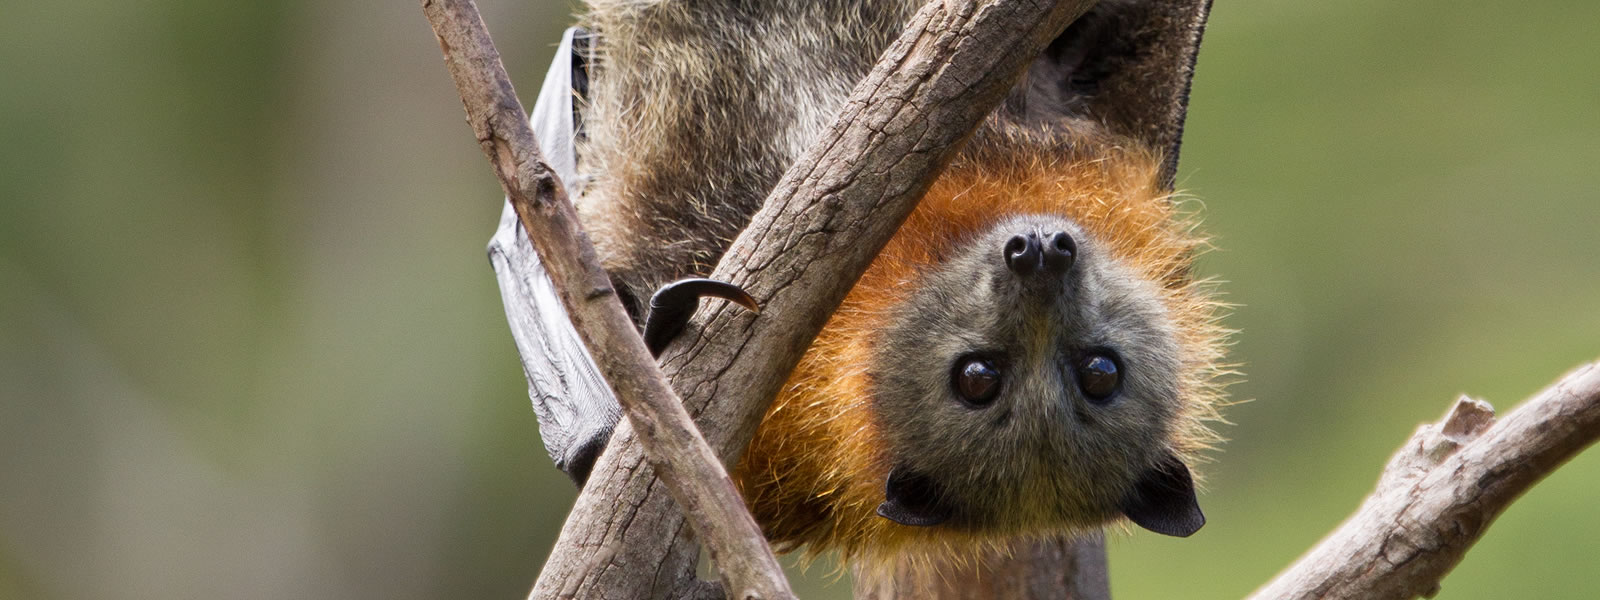 A close-up portrait of a flying fox, Pteropus samoensis, hanging upside down in a tree.